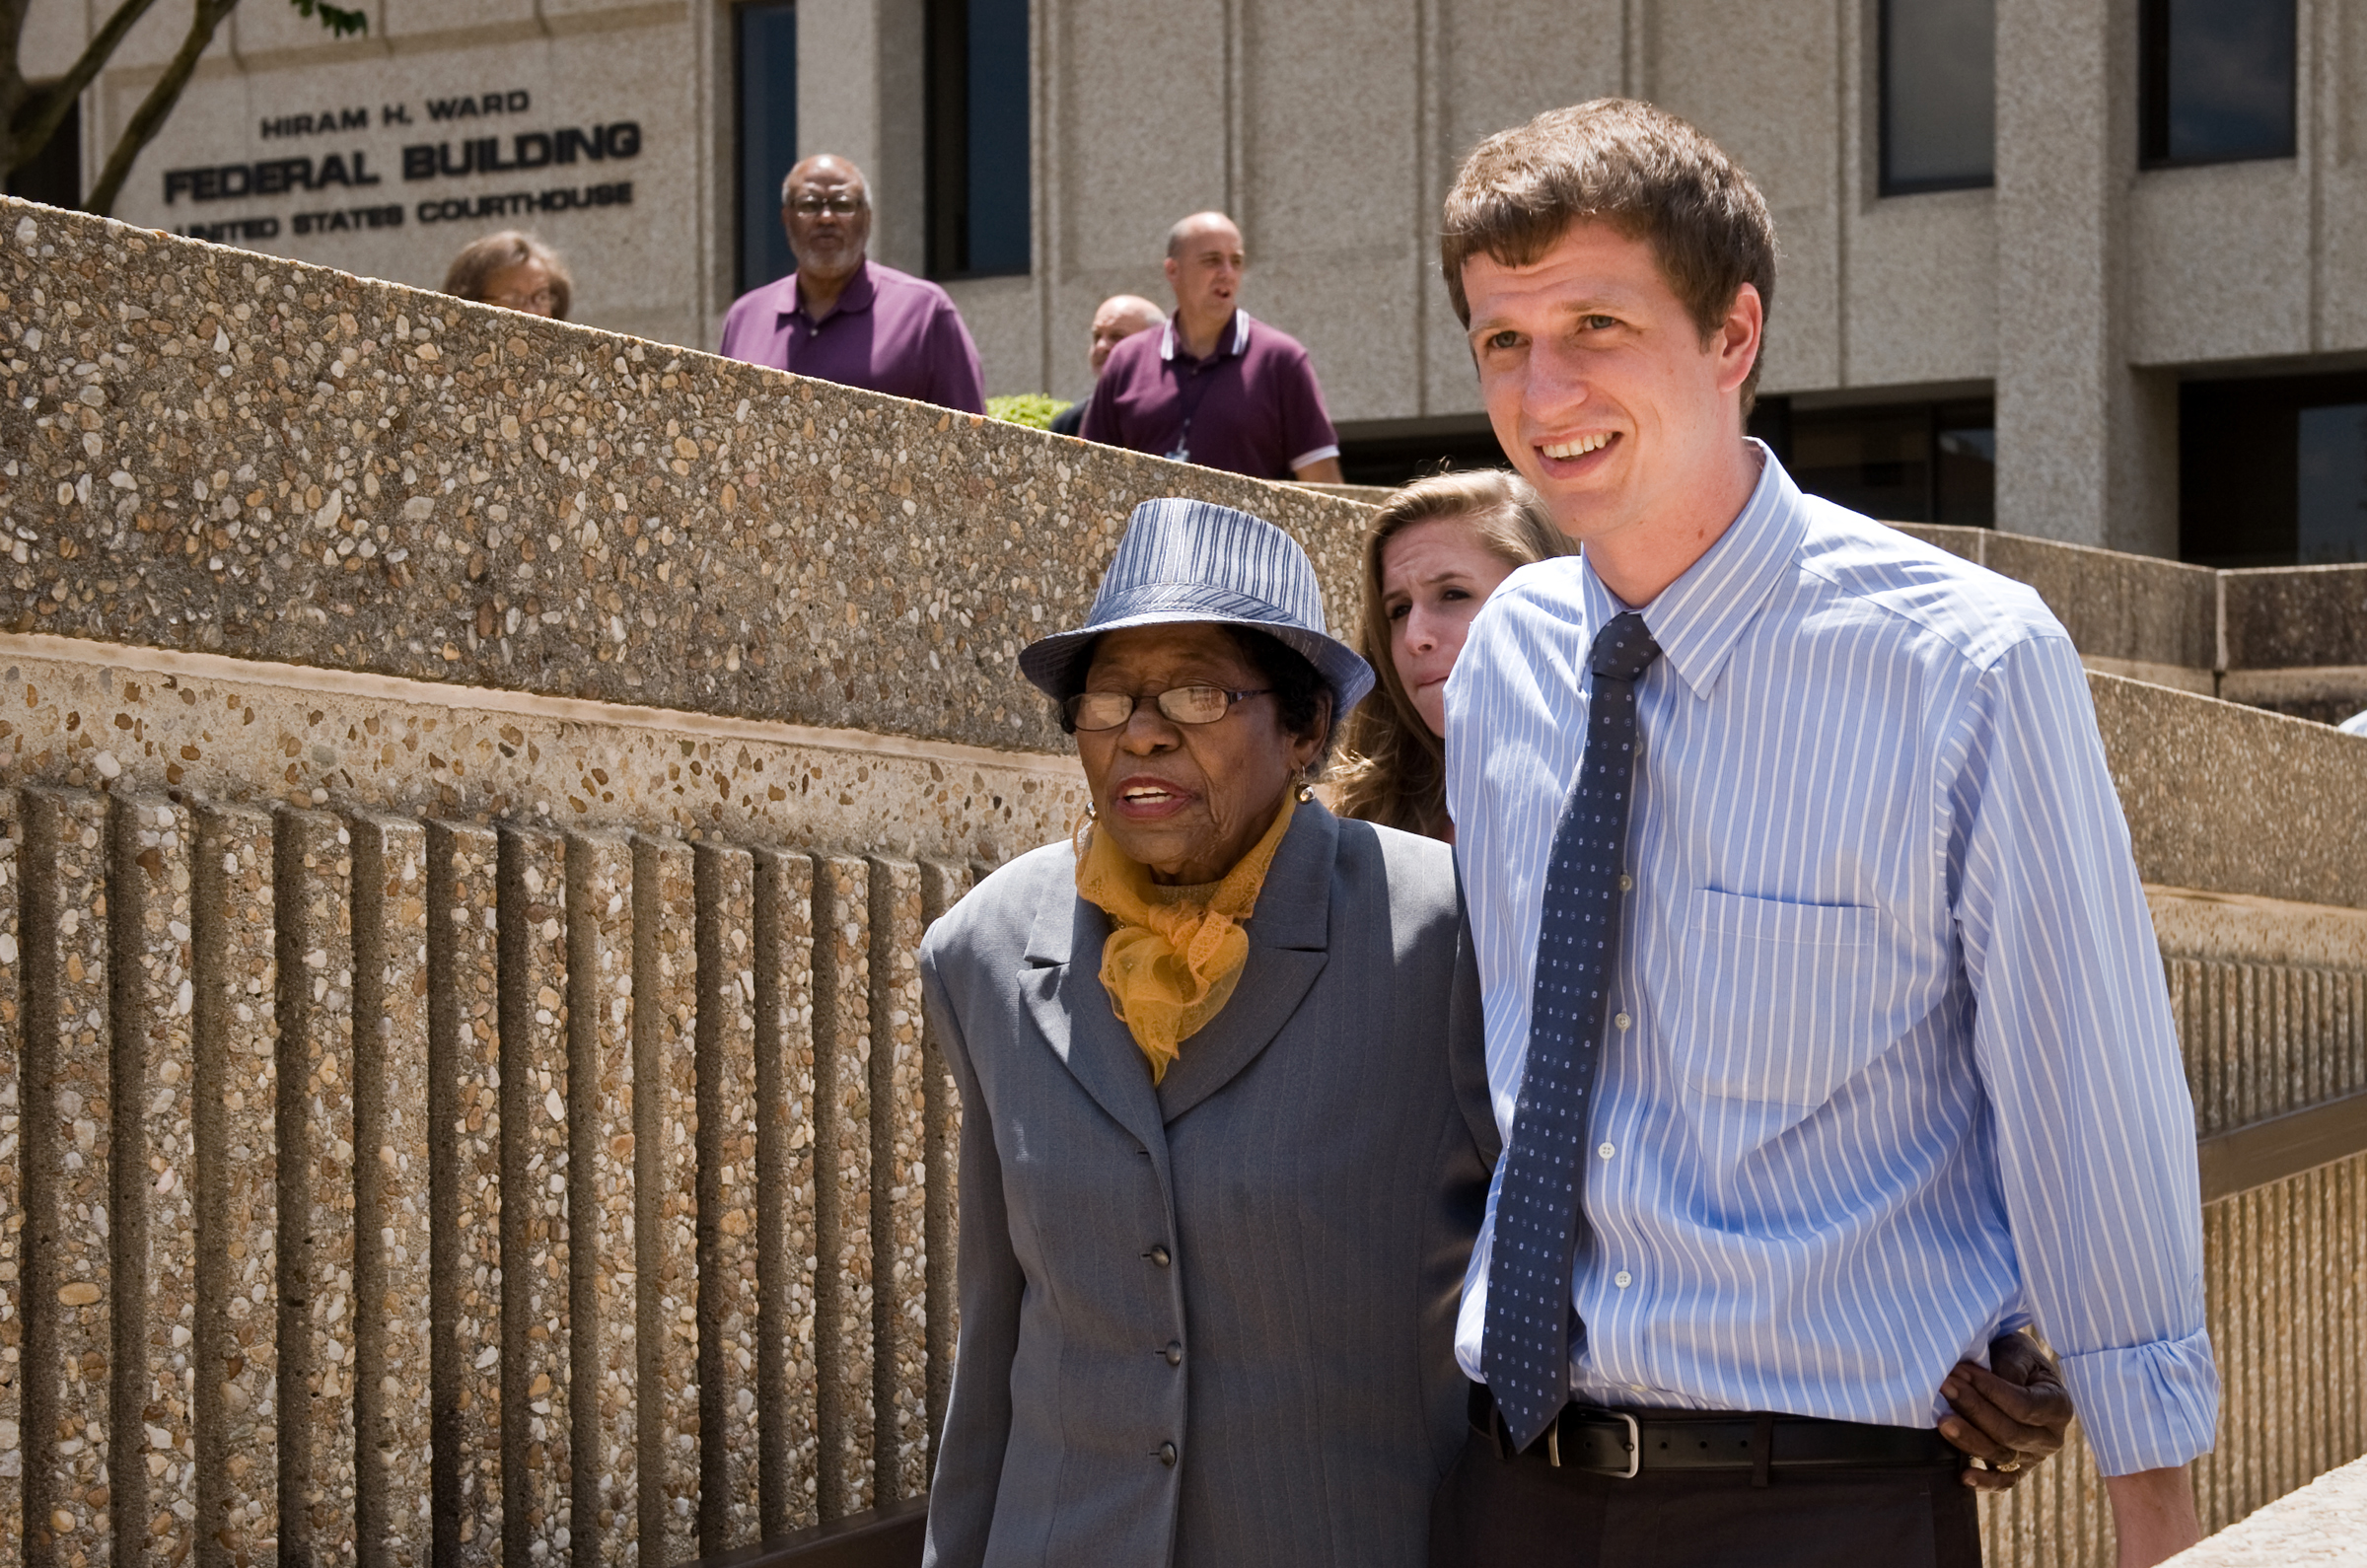 Rob Stephens, a field secretary with the North Carolina NAACP, escorts Rosanell Eaton, a plaintiff in the lawsuit challenging the new North Carolina voting law, out of the Ward Federal building during lunch recess on Monday, July 7, 2014 in Winston-Salem, N.C.  The U.S. Justice Department is asking a federal judge in North Carolina to put sweeping changes to the state's voting laws on hold through the November election. The Justice Department argues the Republican-backed measures are designed to suppress turnout at the polls among minorities, the elderly and college students. (Andrew Dye—AP)